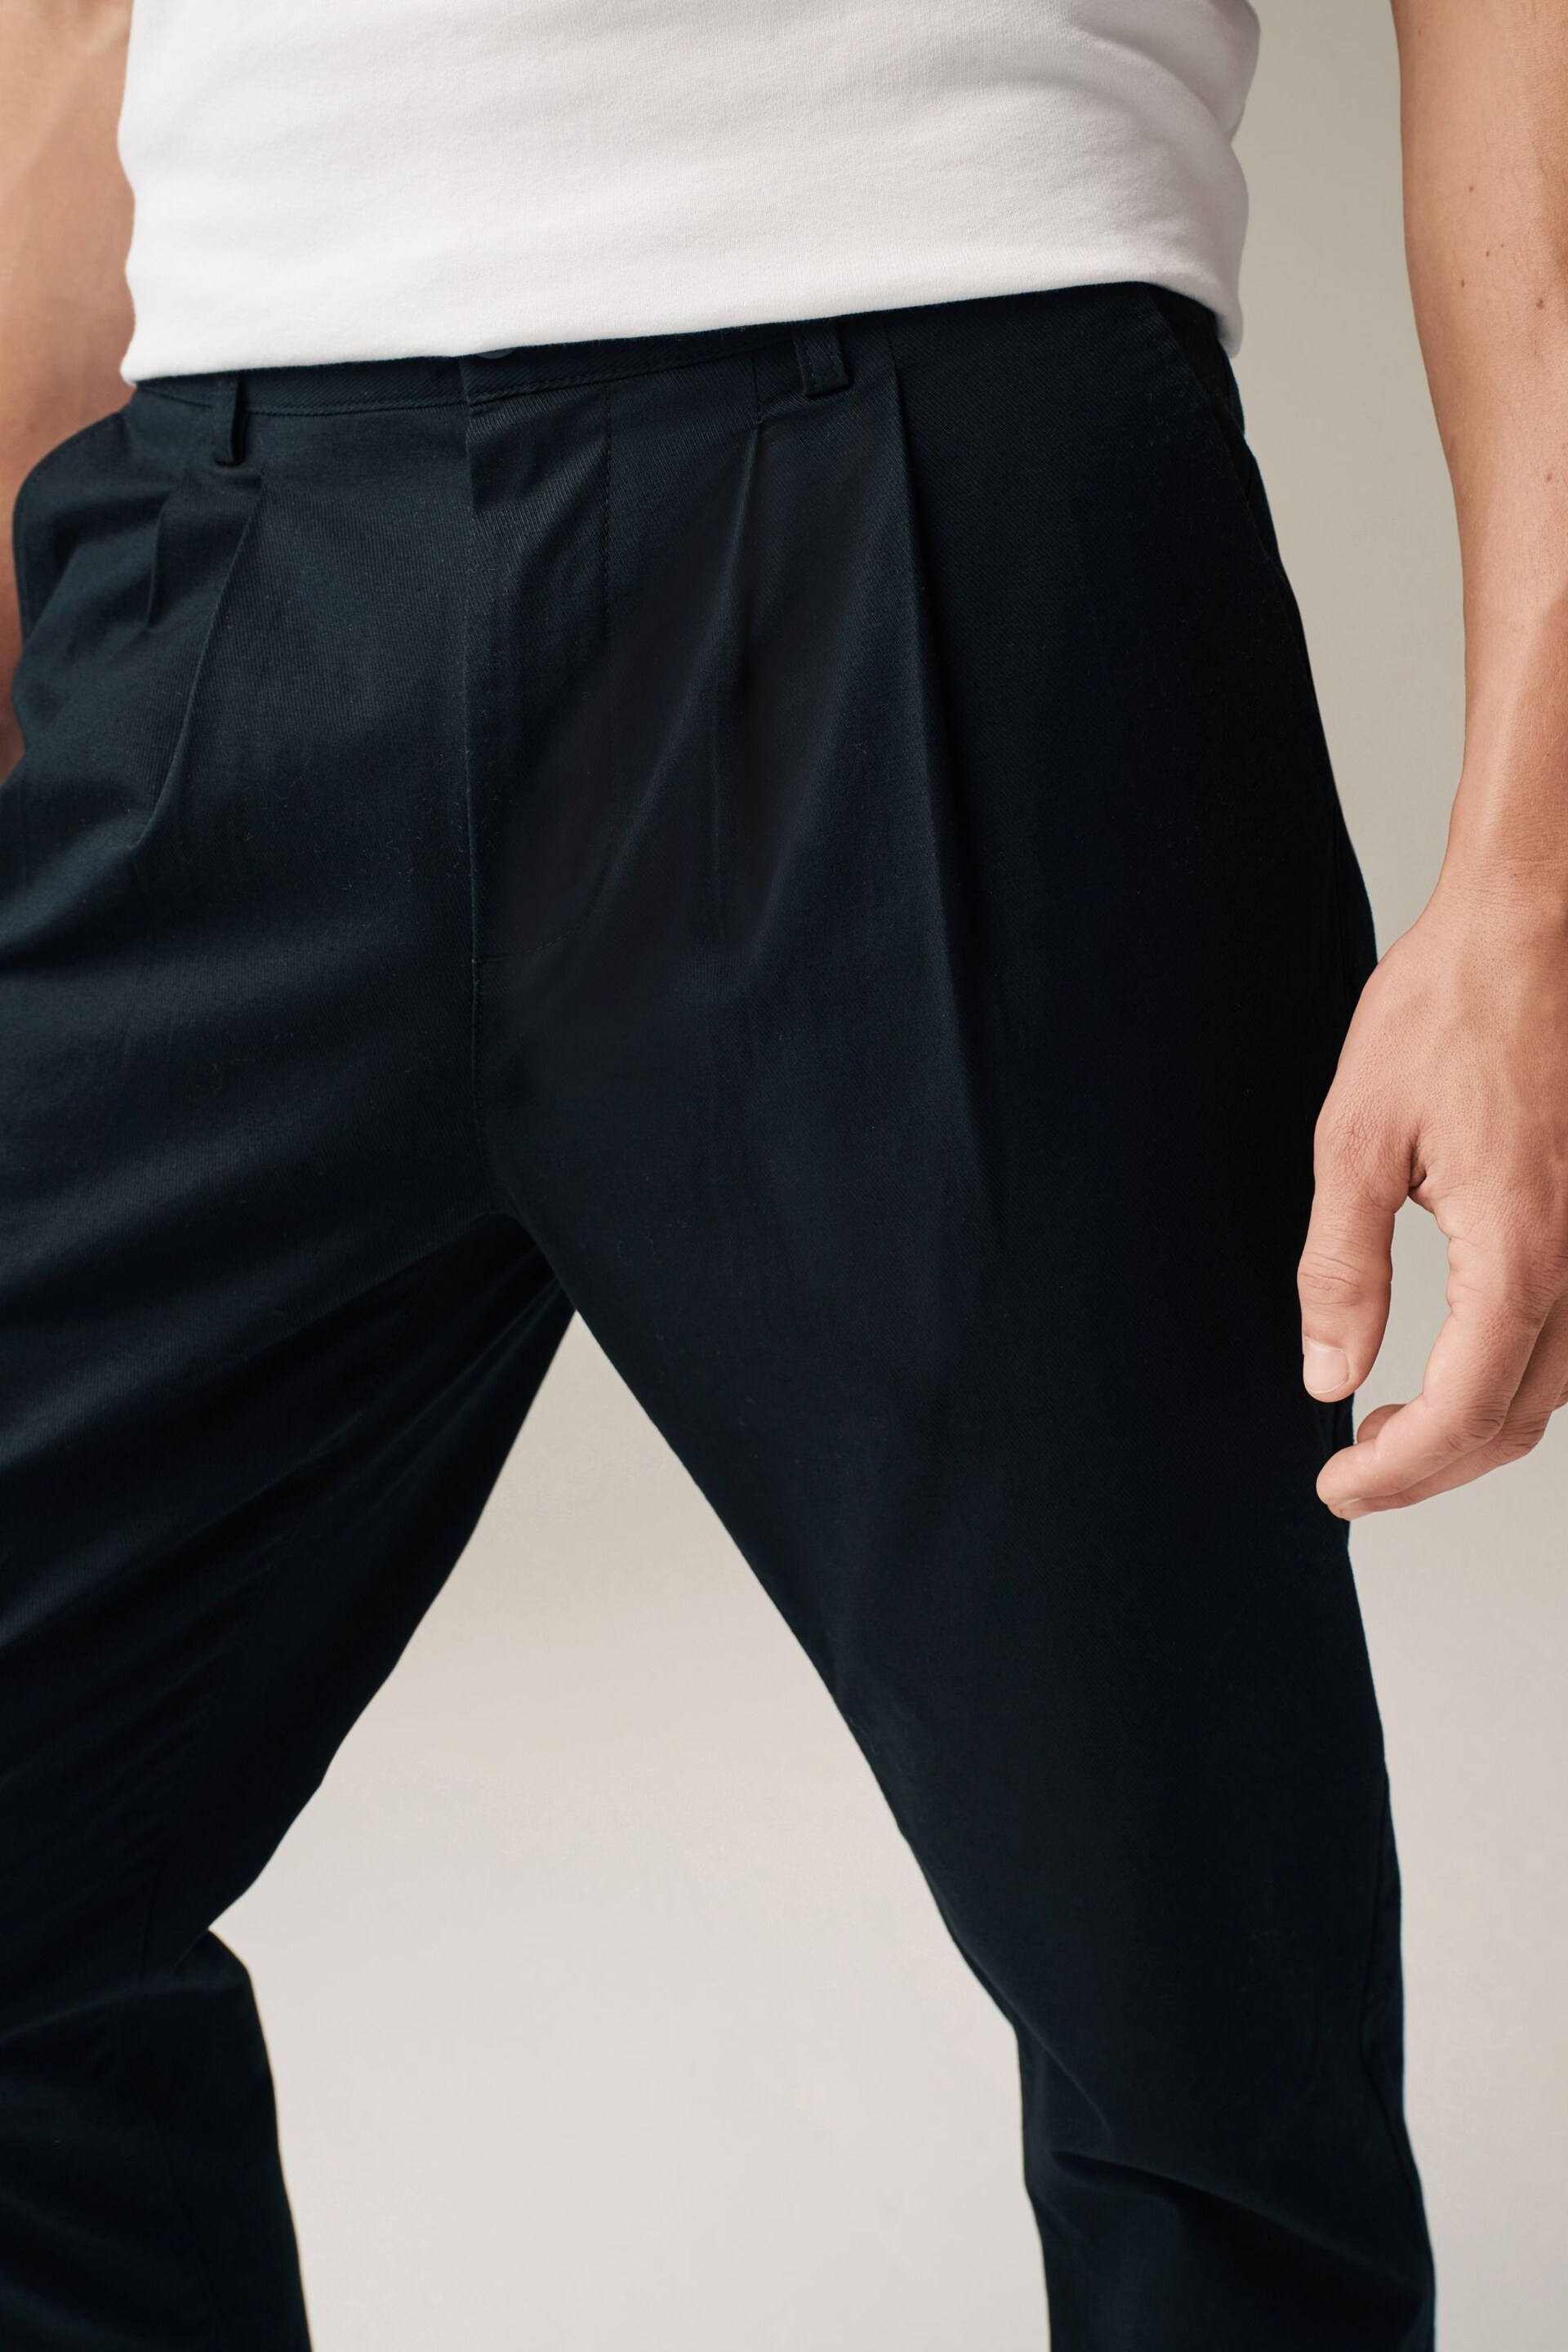 Black Twin Pleat Stretch Chinos Trousers - Image 5 of 10